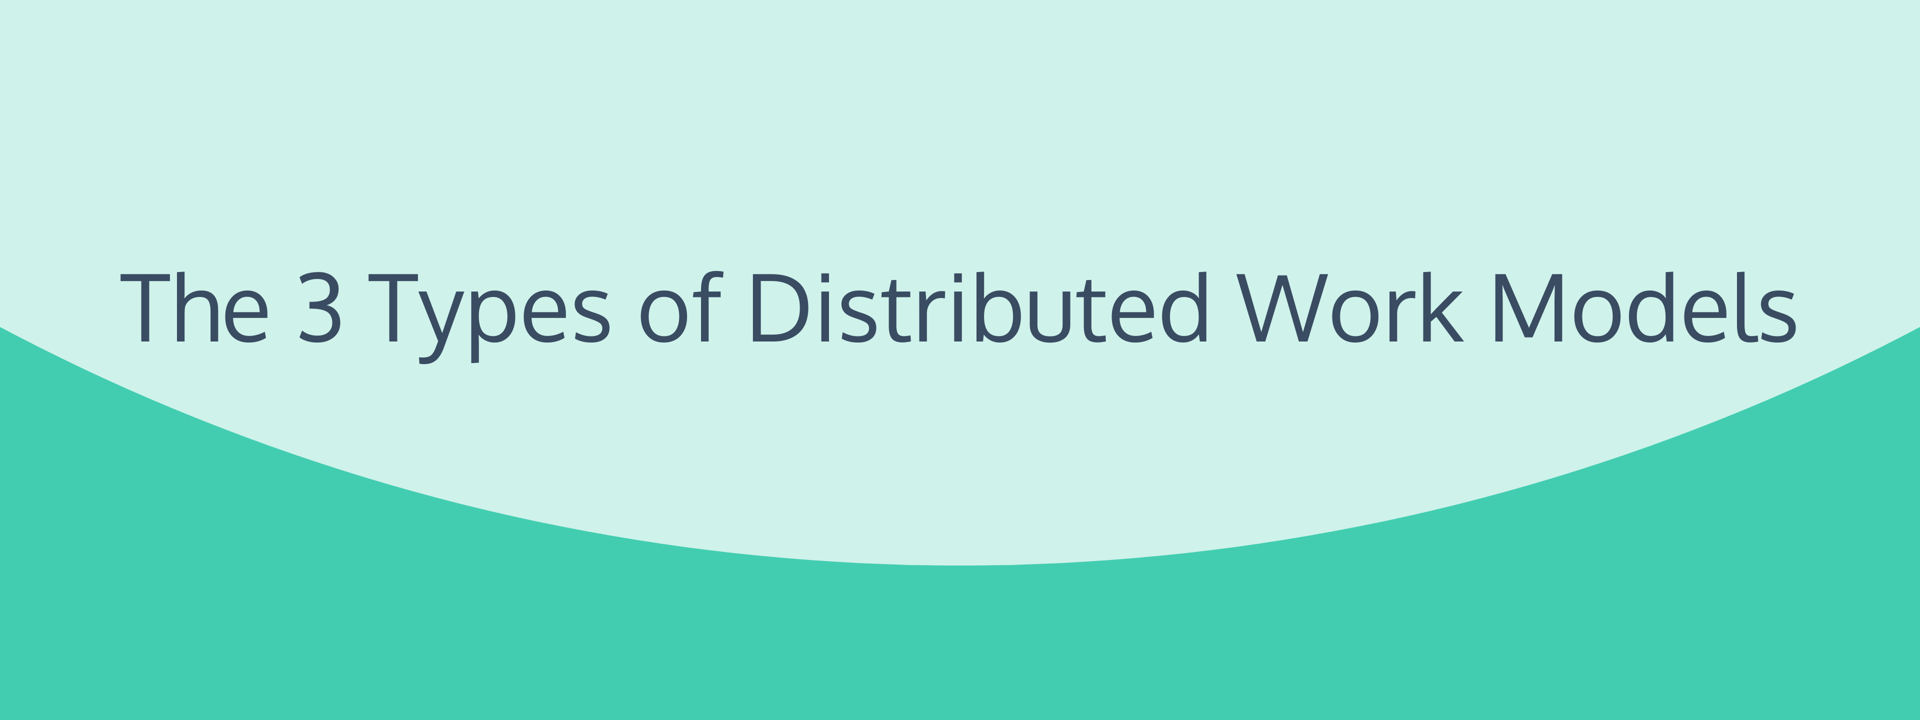 The 3 Types of Distributed Work Models